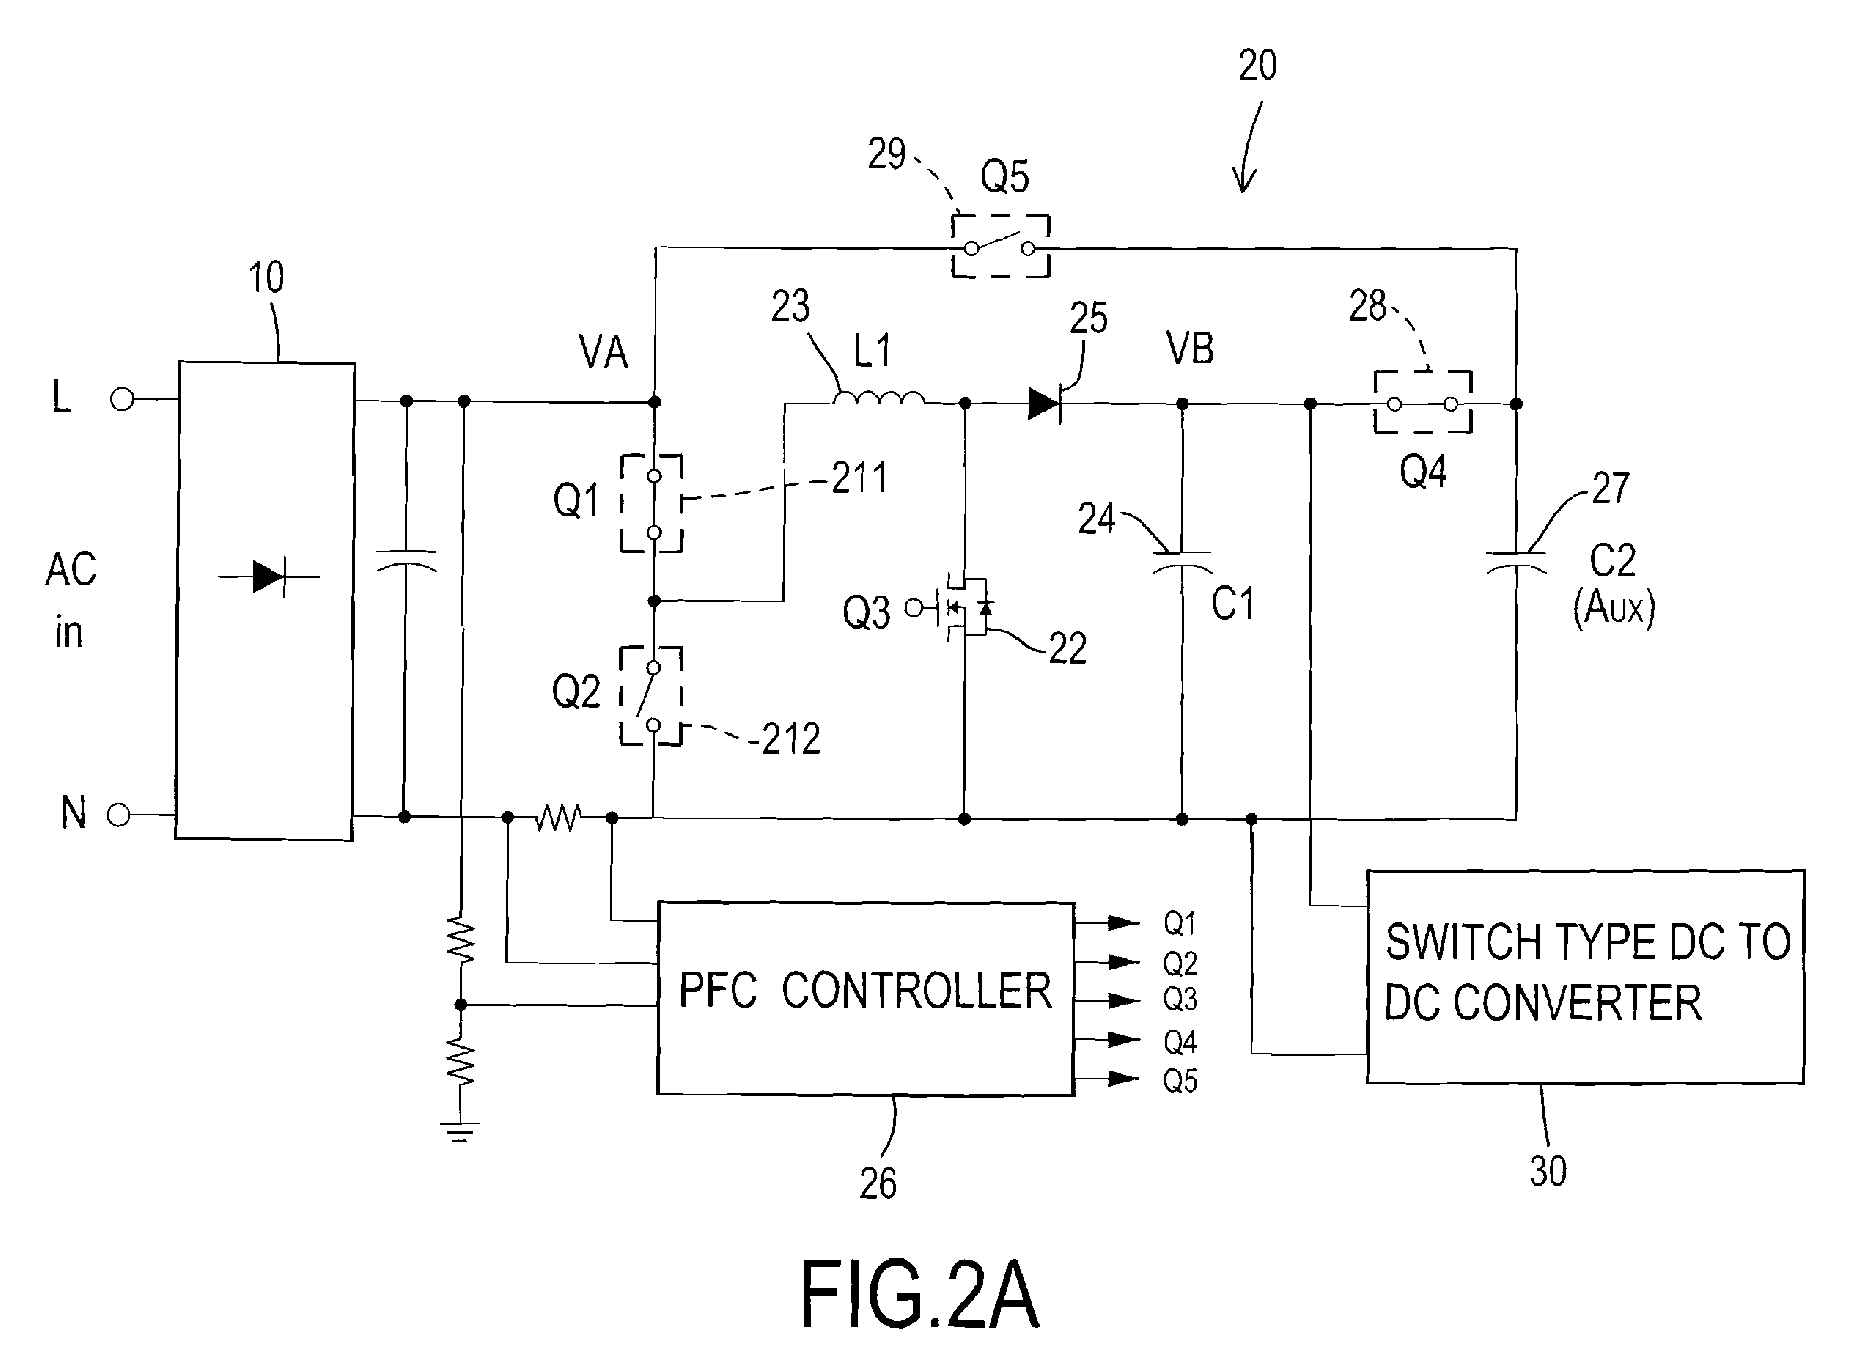 AC to DC power converter using an energy-storage capacitor for providing hold-up time function